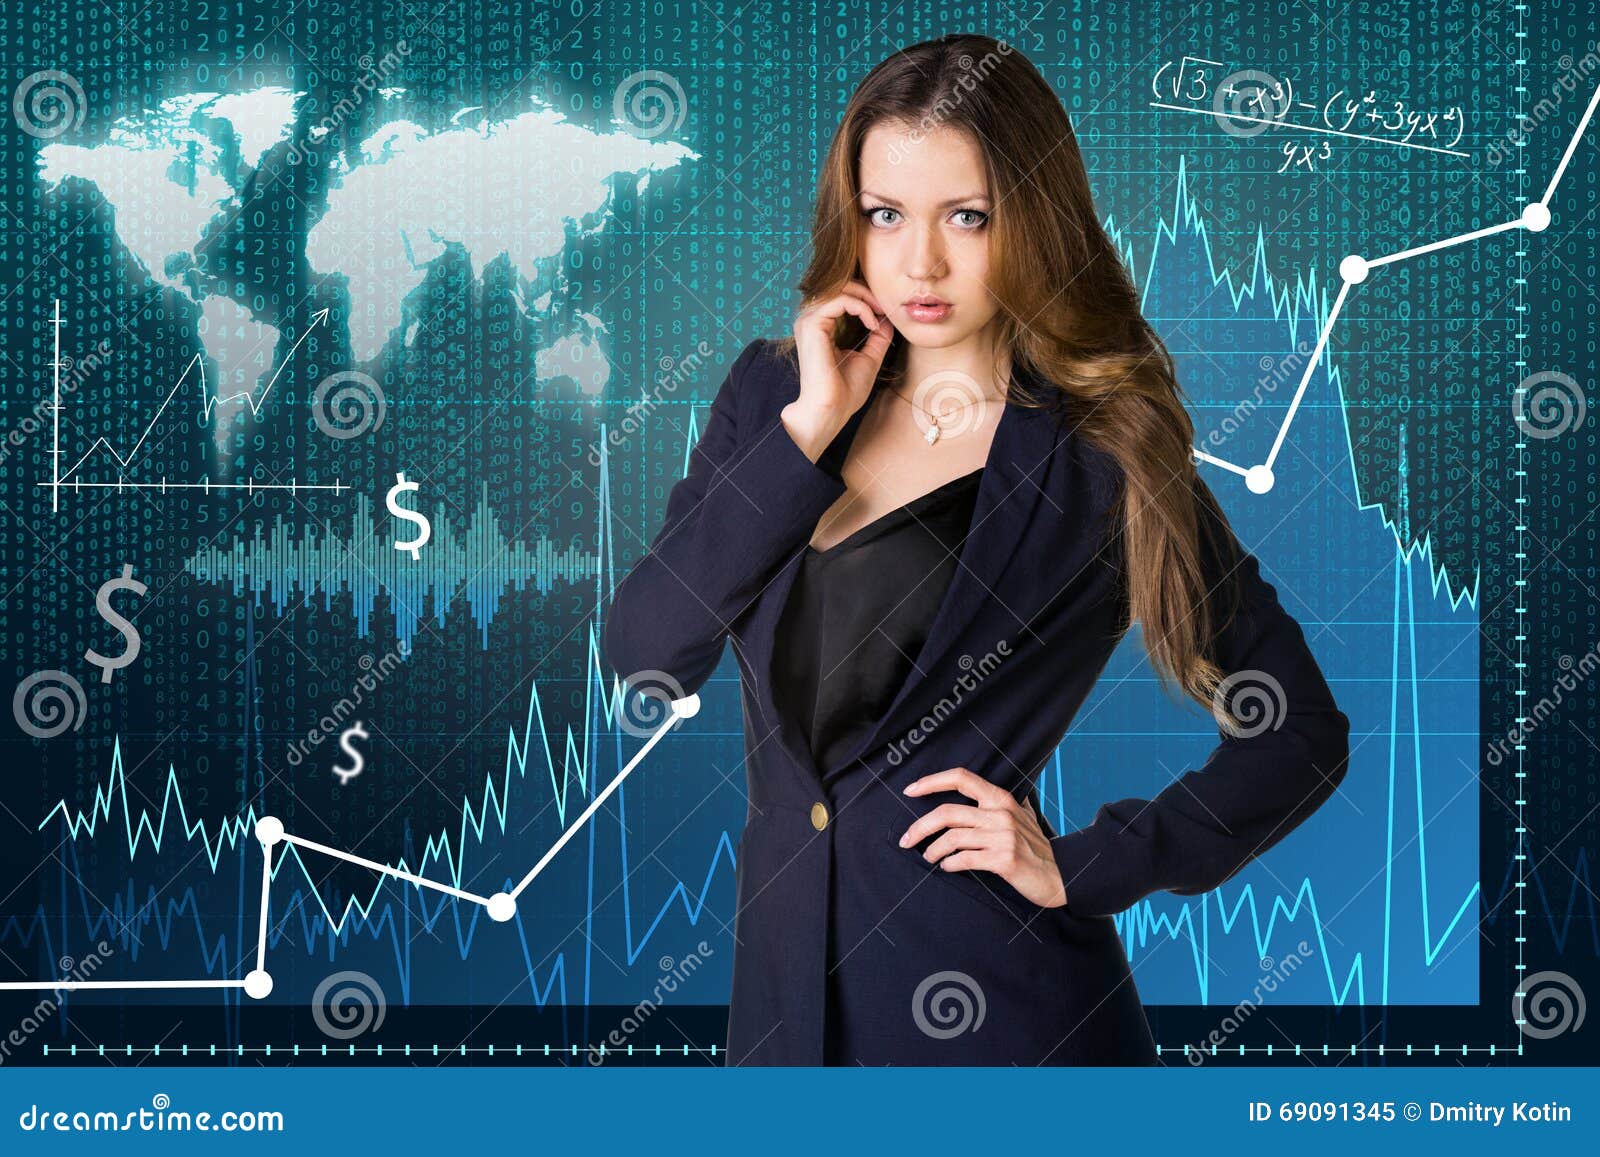 woman on the traiding graph background